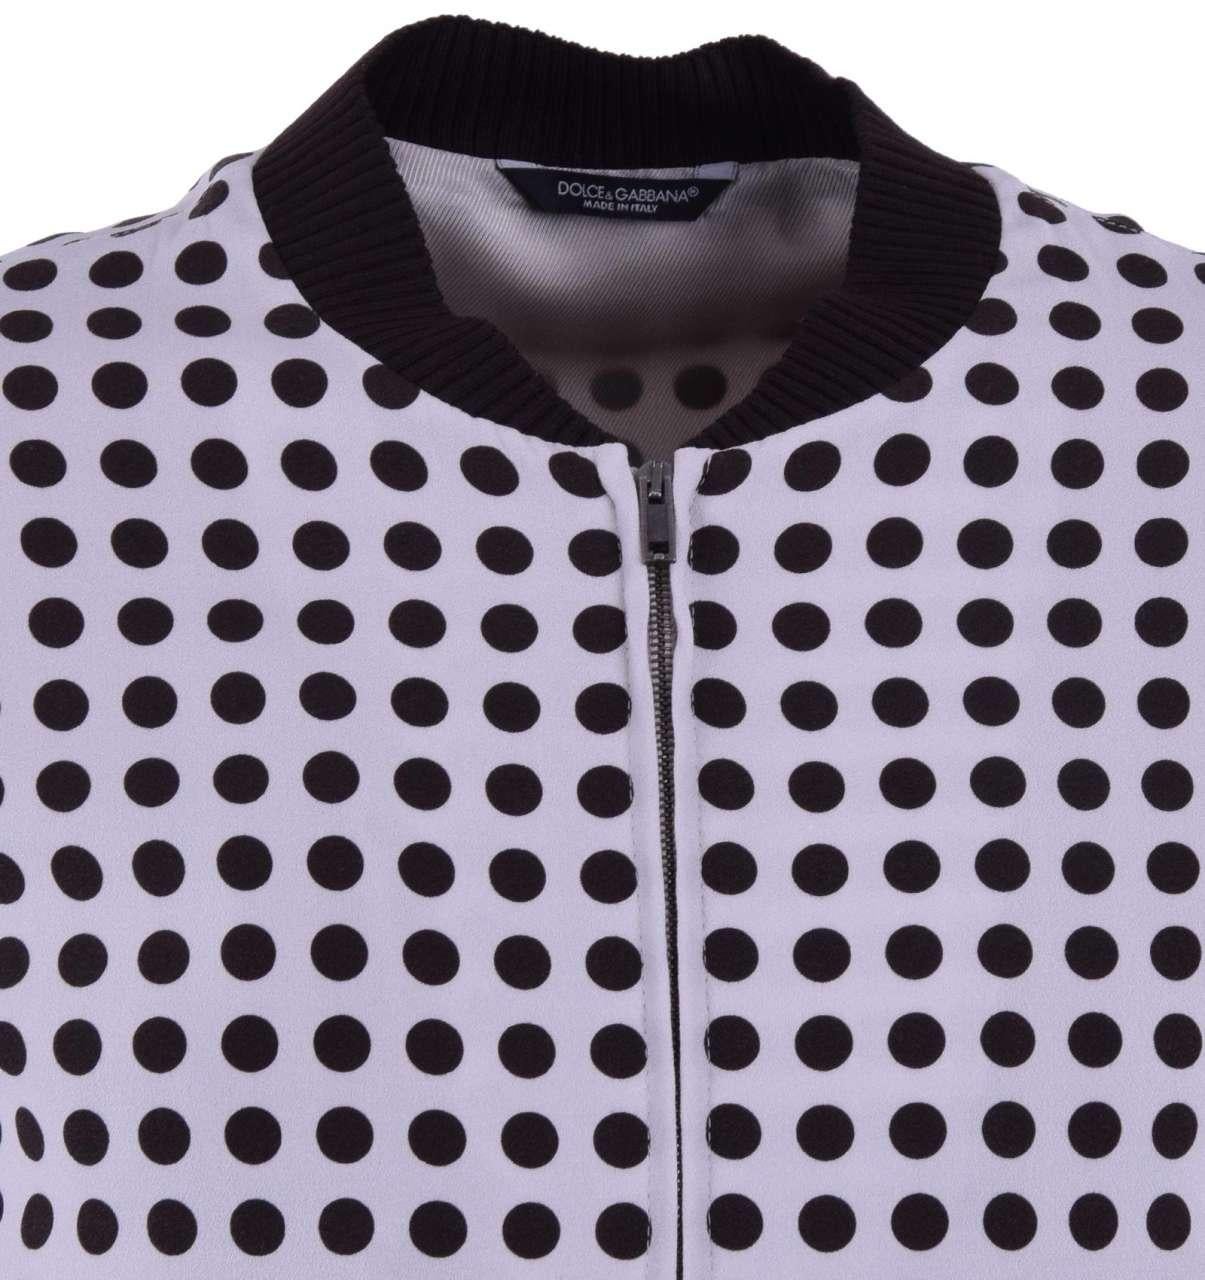 - Polka Dot printed viscose bomber jacket with jersey trim by DOLCE & GABBANA - Slim F- New with tag - MADE IN ITALY - Former RRP: EUR 895 - Model: G9W58T-FSMK0-X0802 - Material: 66% Viscose, 29% Cotton, 4% Silk, 1% Elastan - Lining: 100% Viscose -